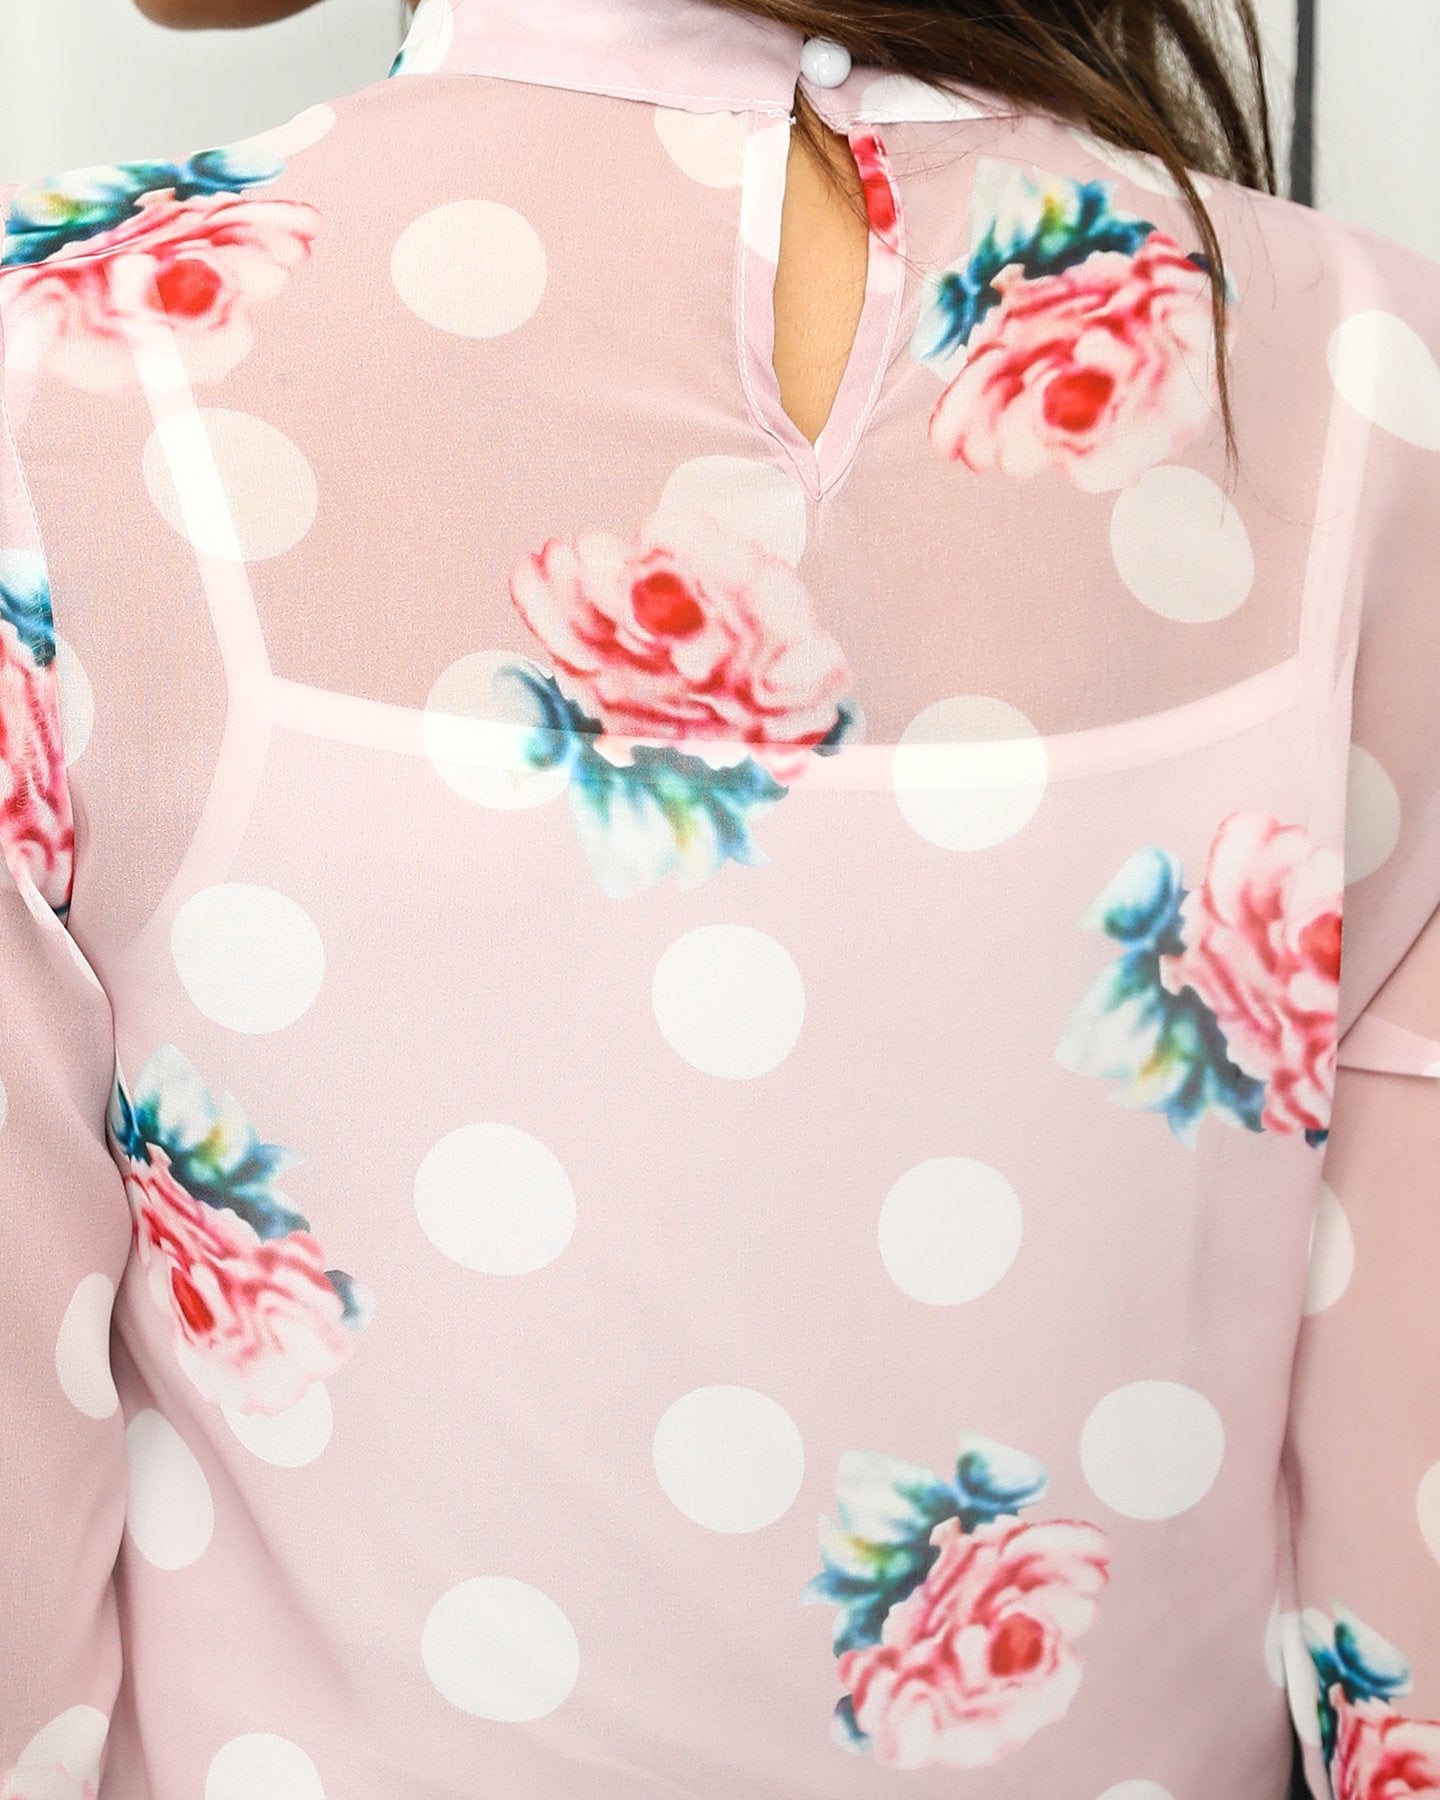 Tied Neck Dot Floral Print Casual Shirt